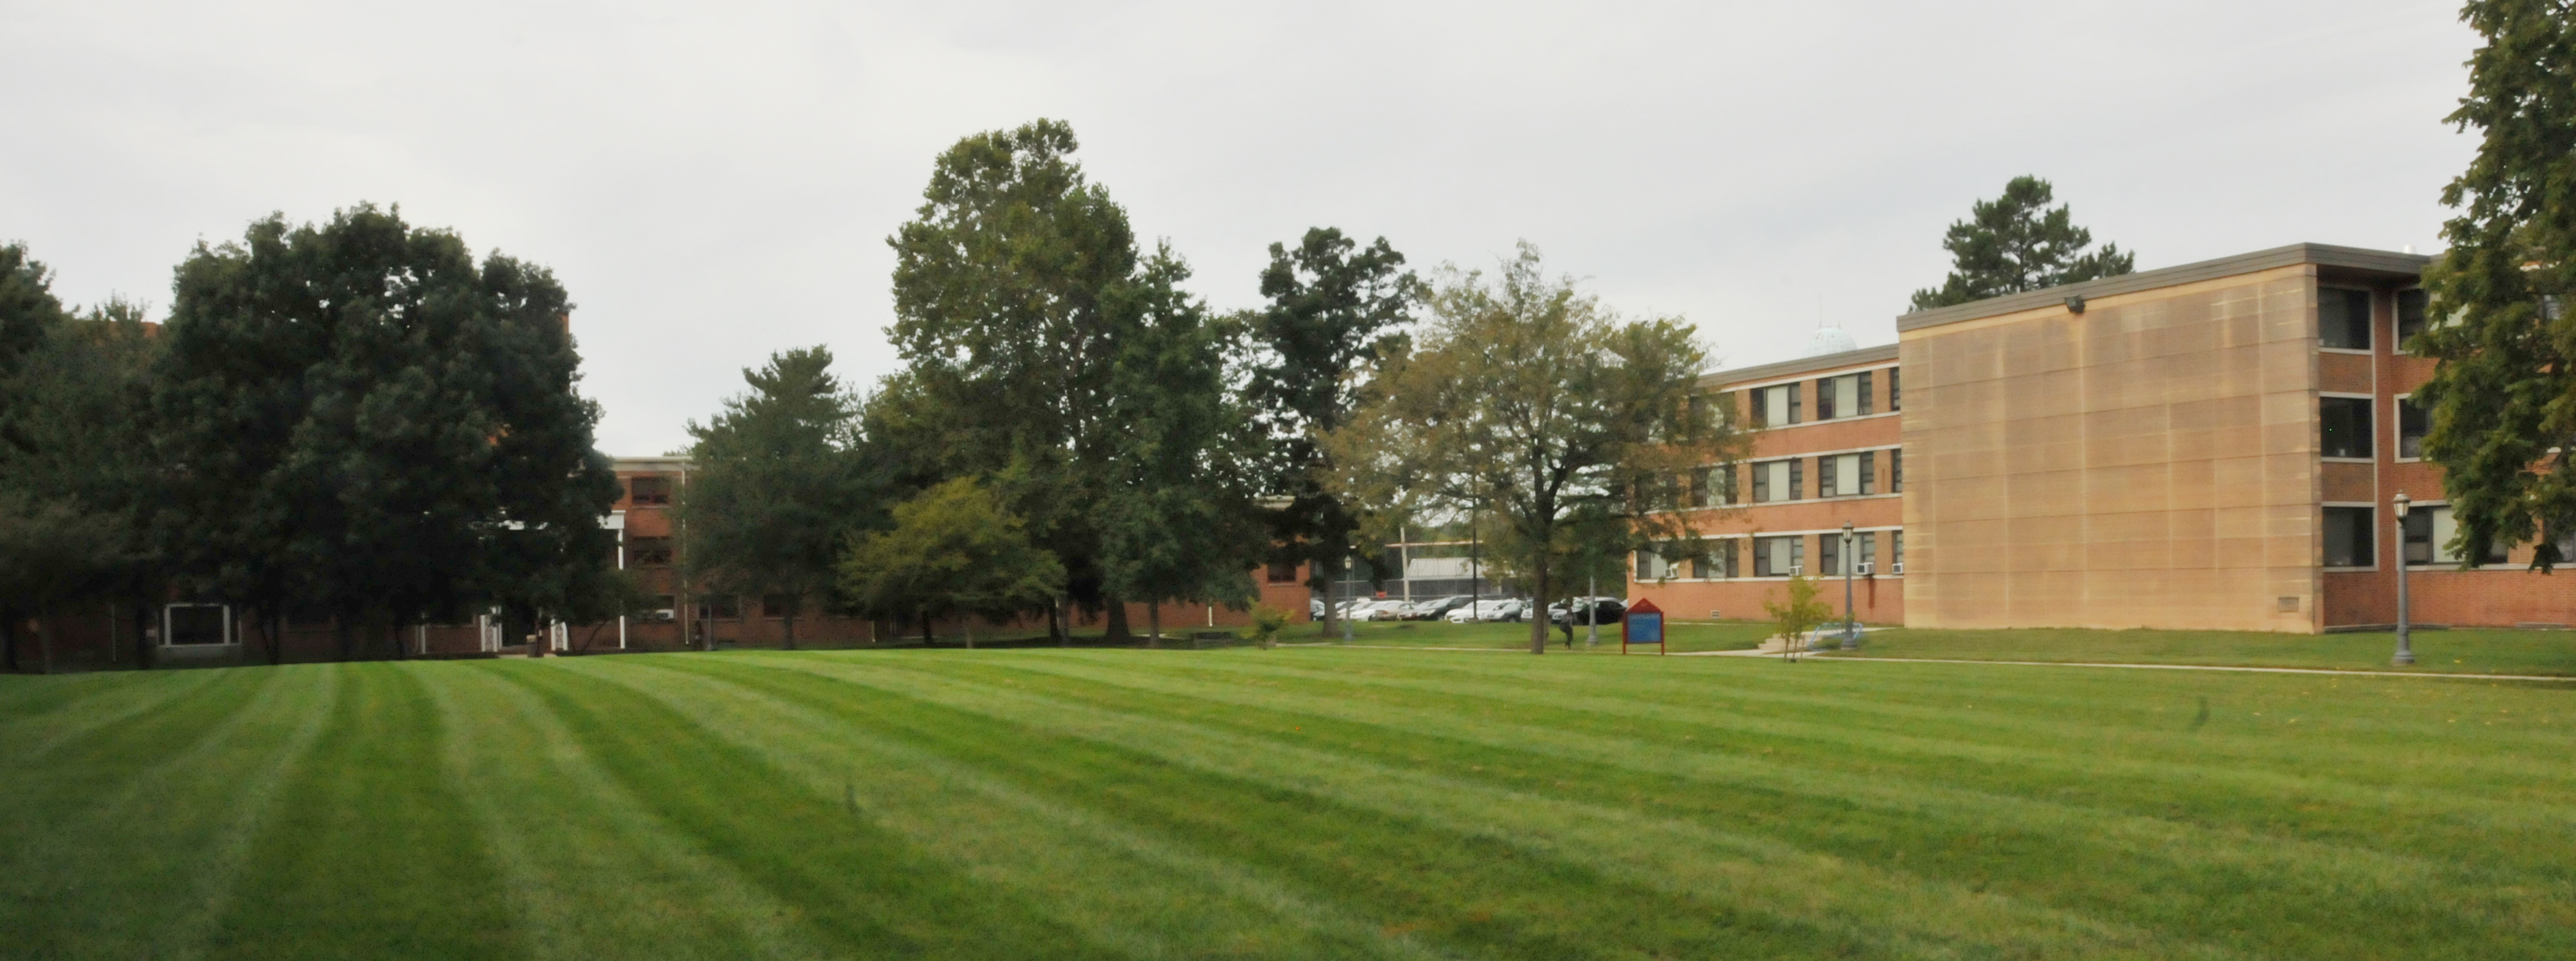 As part of the new residence hall plan, Tubman Hall (obscured on the left by trees) and Laws Hall will be demolished.